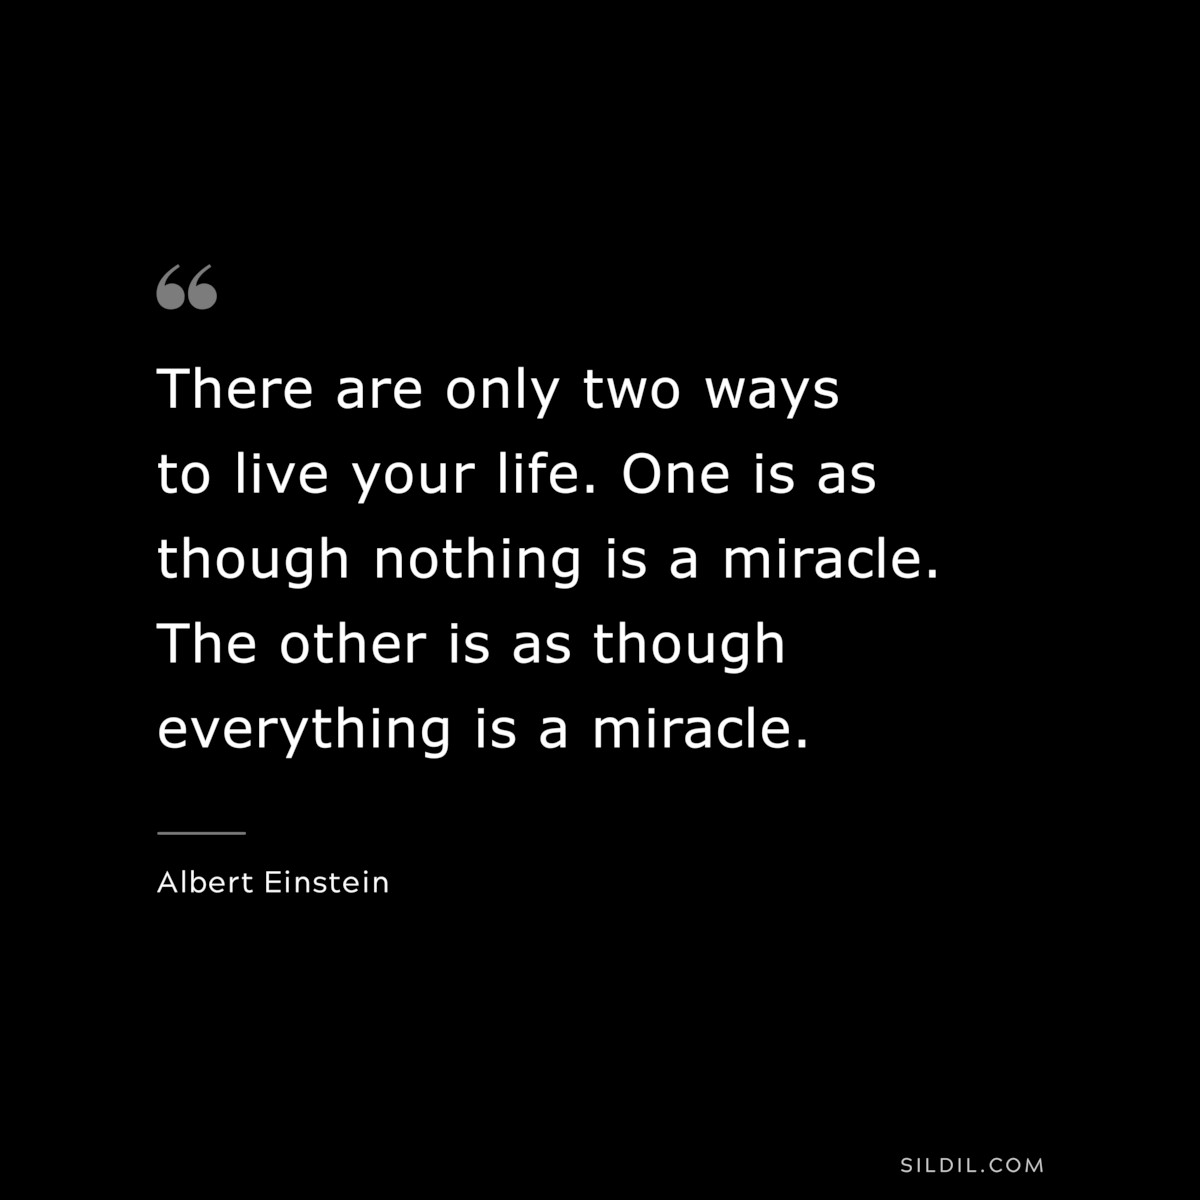 There are only two ways to live your life. One is as though nothing is a miracle. The other is as though everything is a miracle. ― Albert Einstein